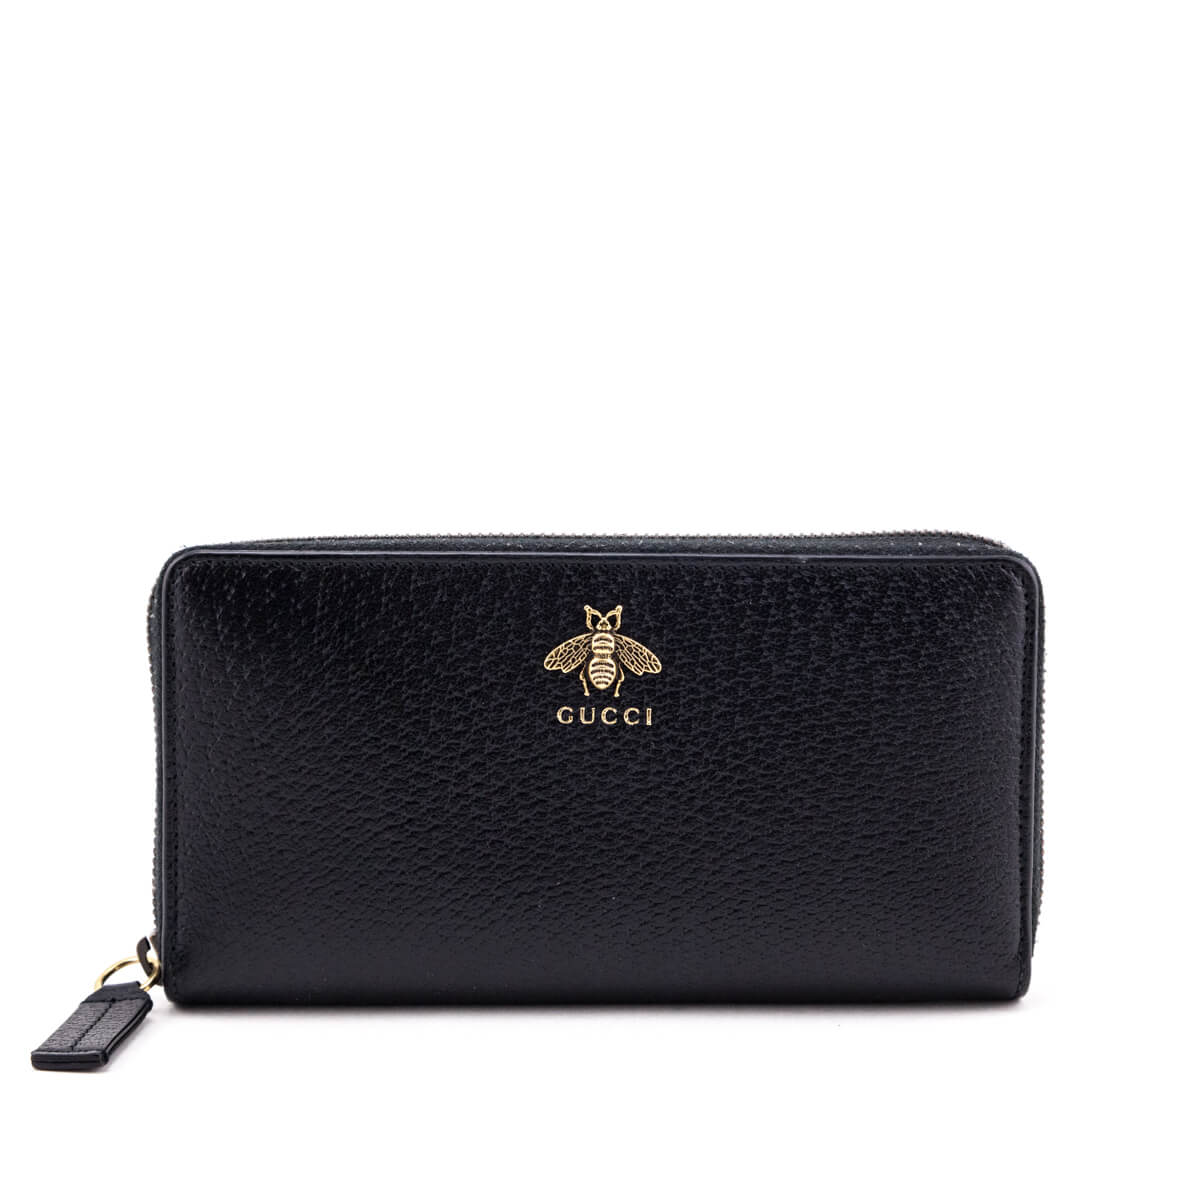 Gucci Black Tanned Leather Animalier Zip Around Wallet - Shop Gucci CA